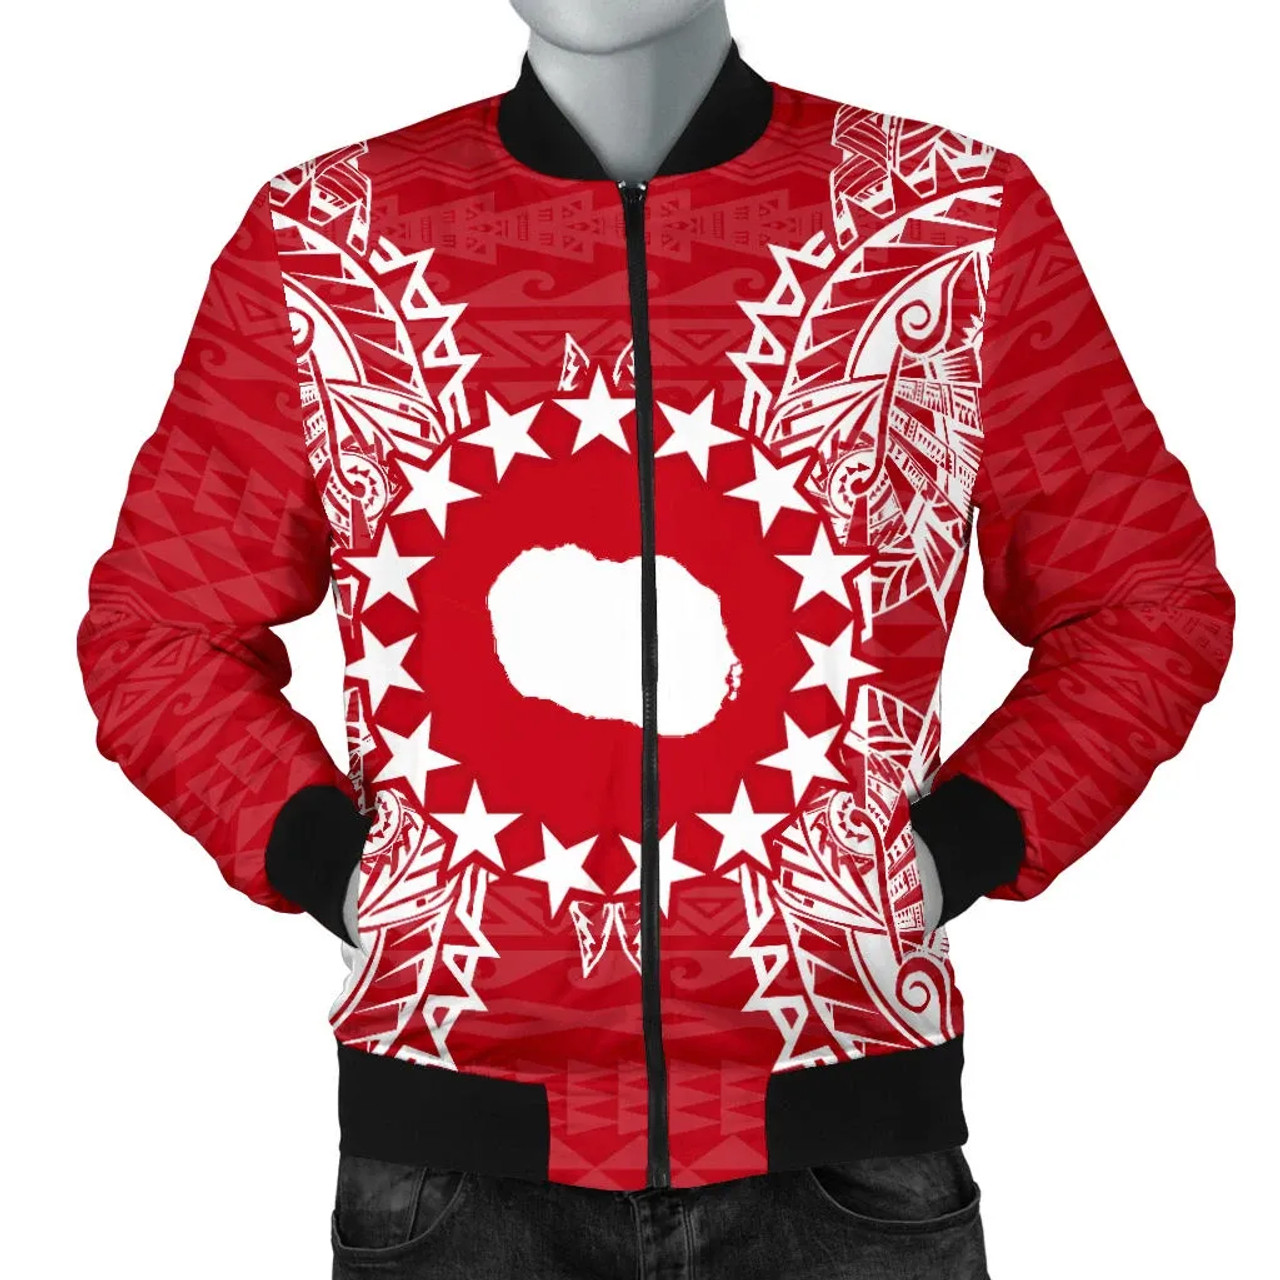 Cook Islands Polynesian Bomber Jacket Map Red White 1